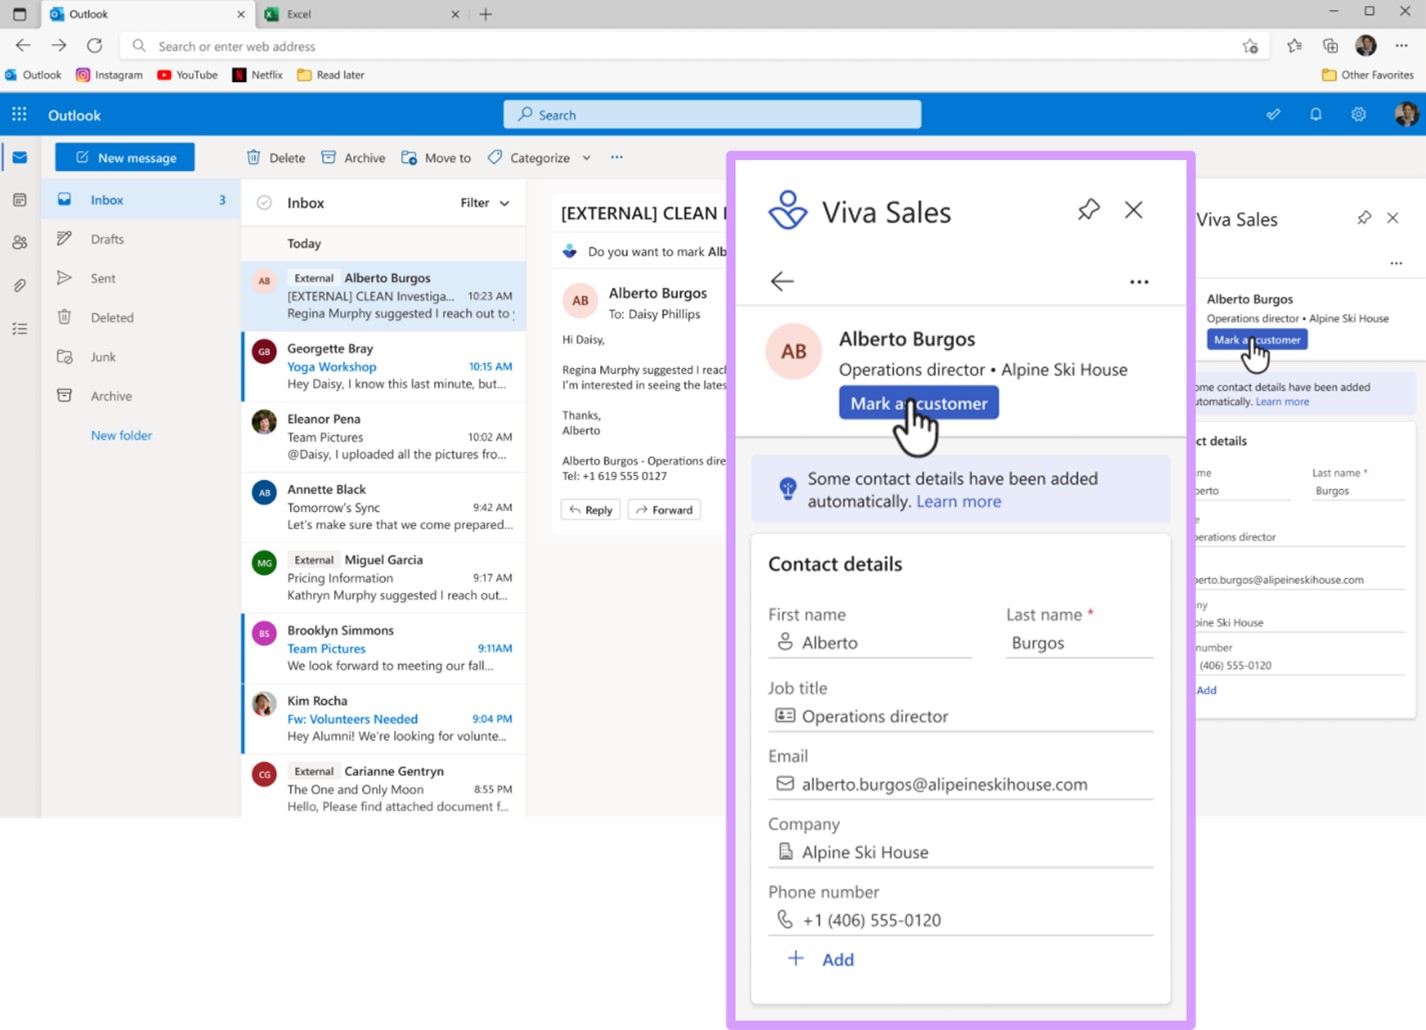 Viva Sales allows you to mark customers directly in Outlook.